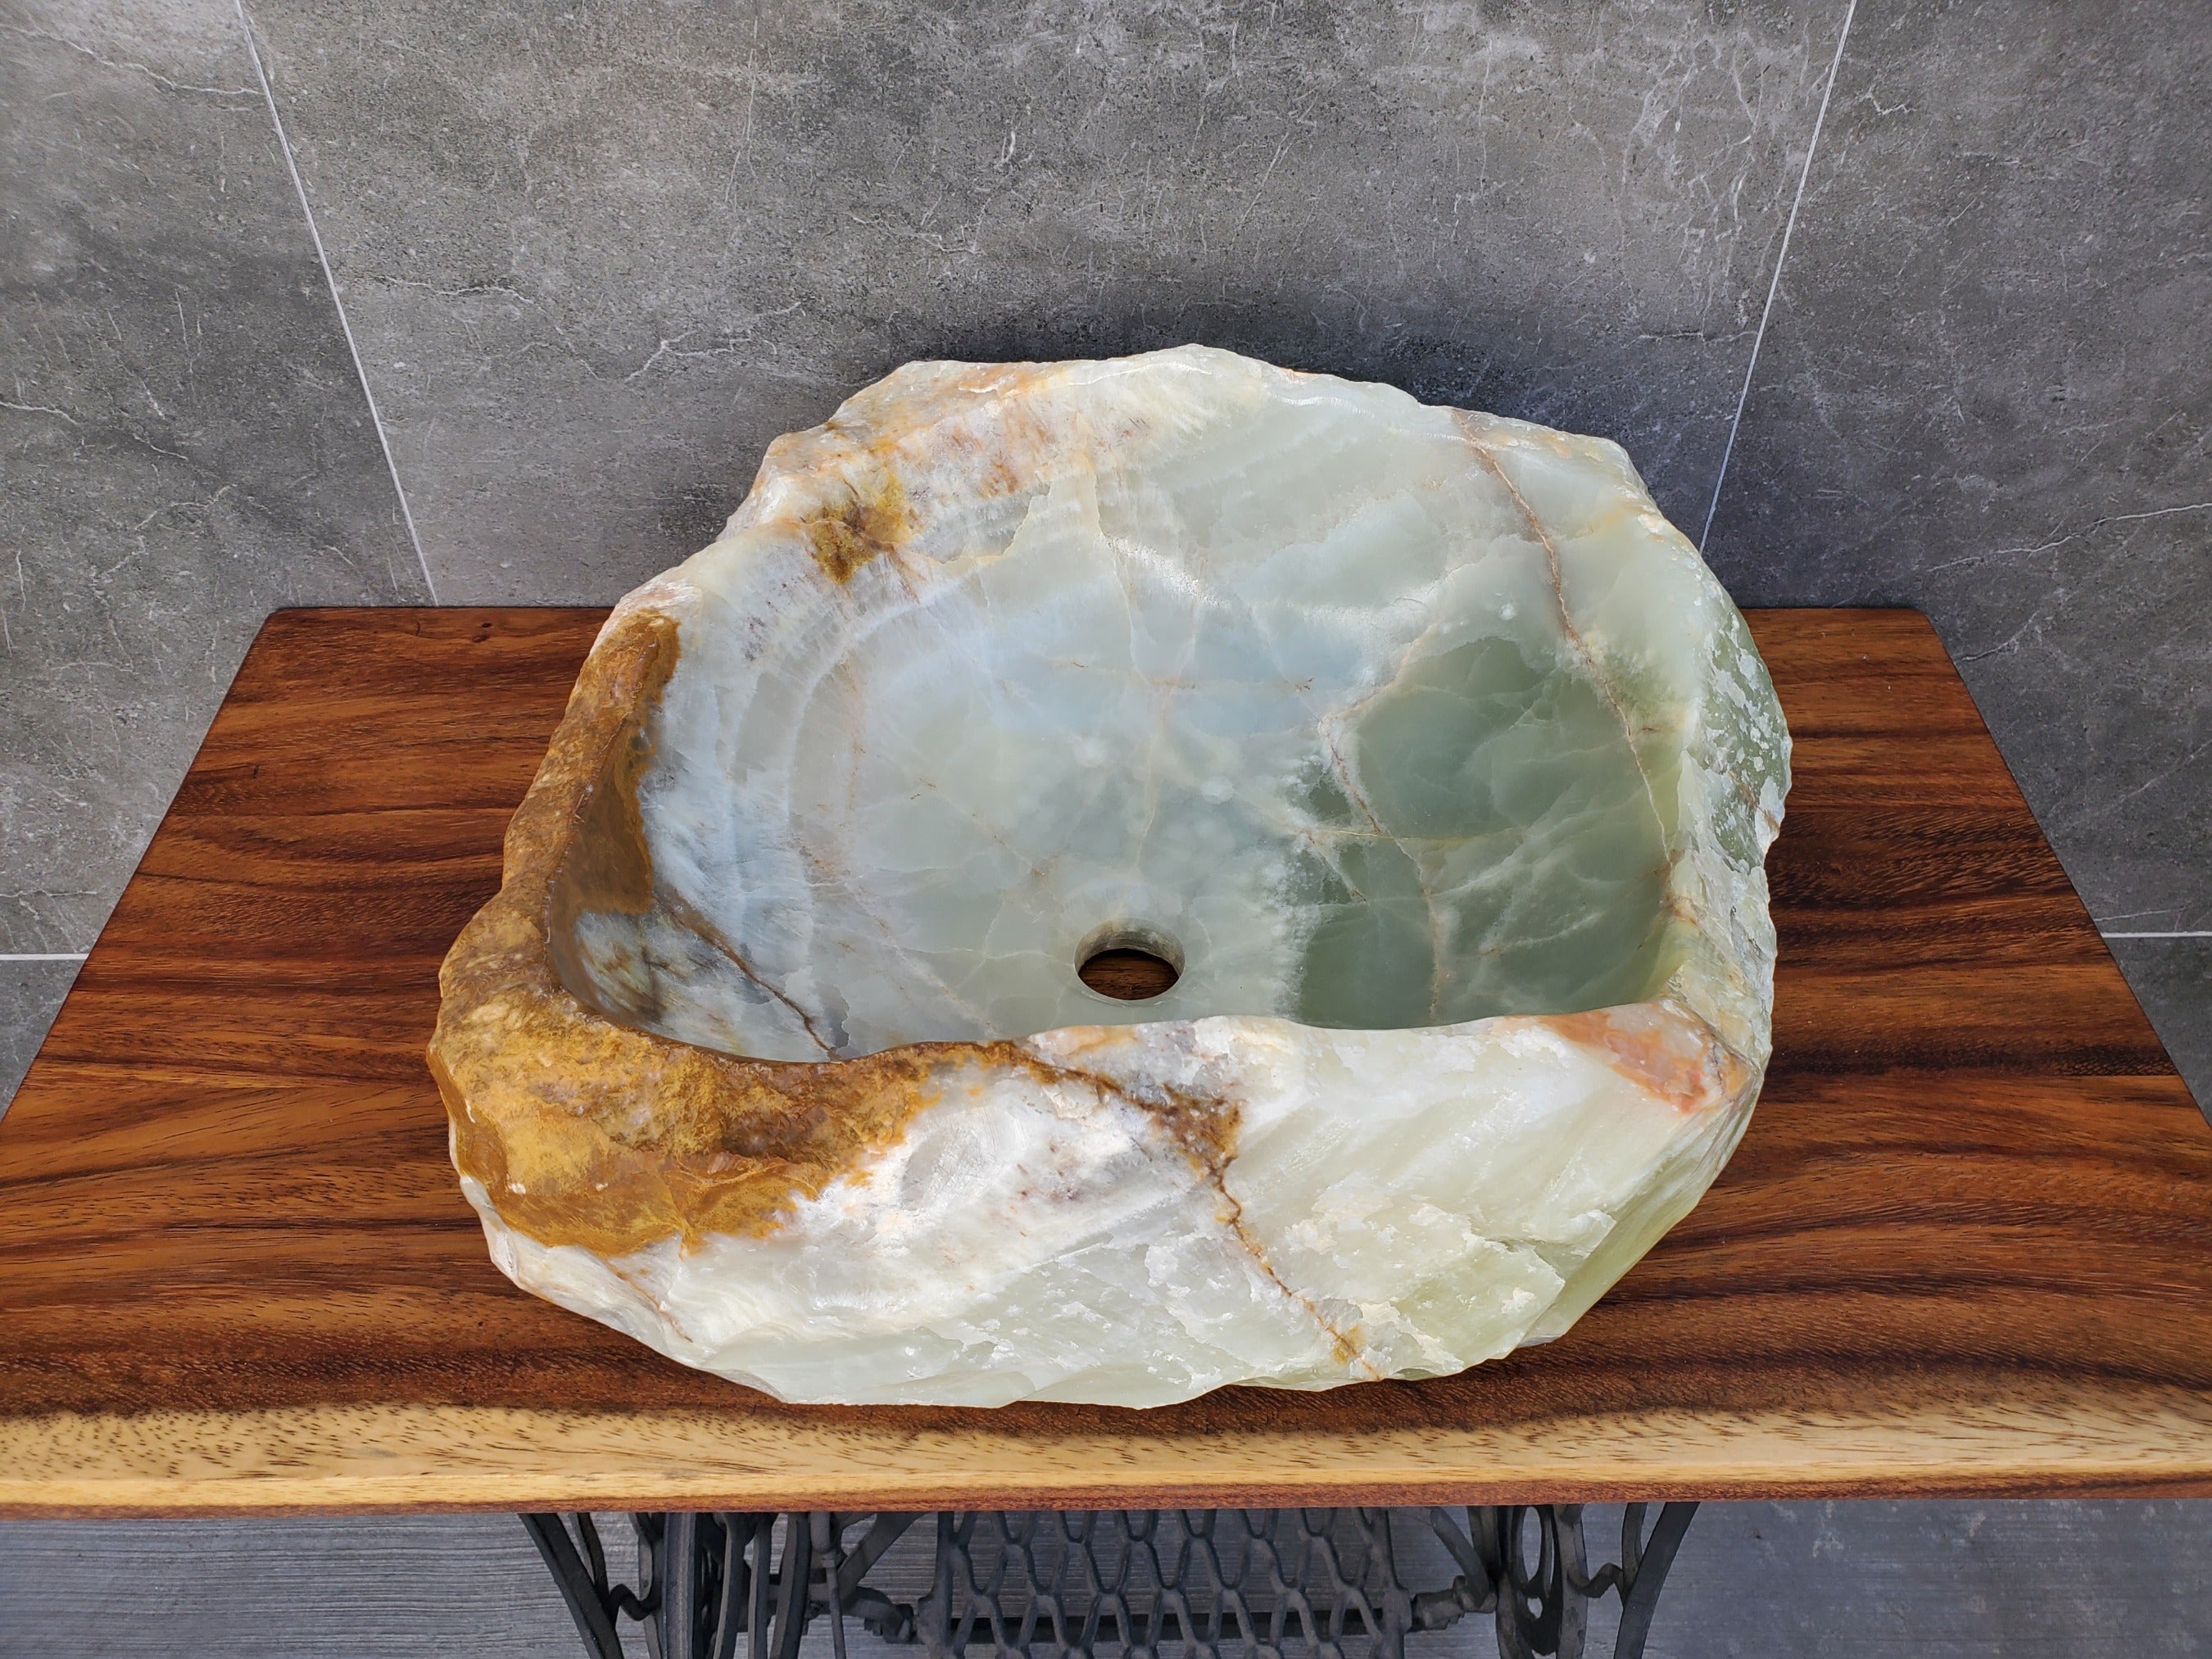 Green and Brown Onyx Stone Vessel Bathroom Sink. Above Counter. It is one of a kind and a beautiful work of art. Handmade in Mexico. Hand Finished in the USA. Ships from the USA. Buy now at www.felipeandgrace.com. 